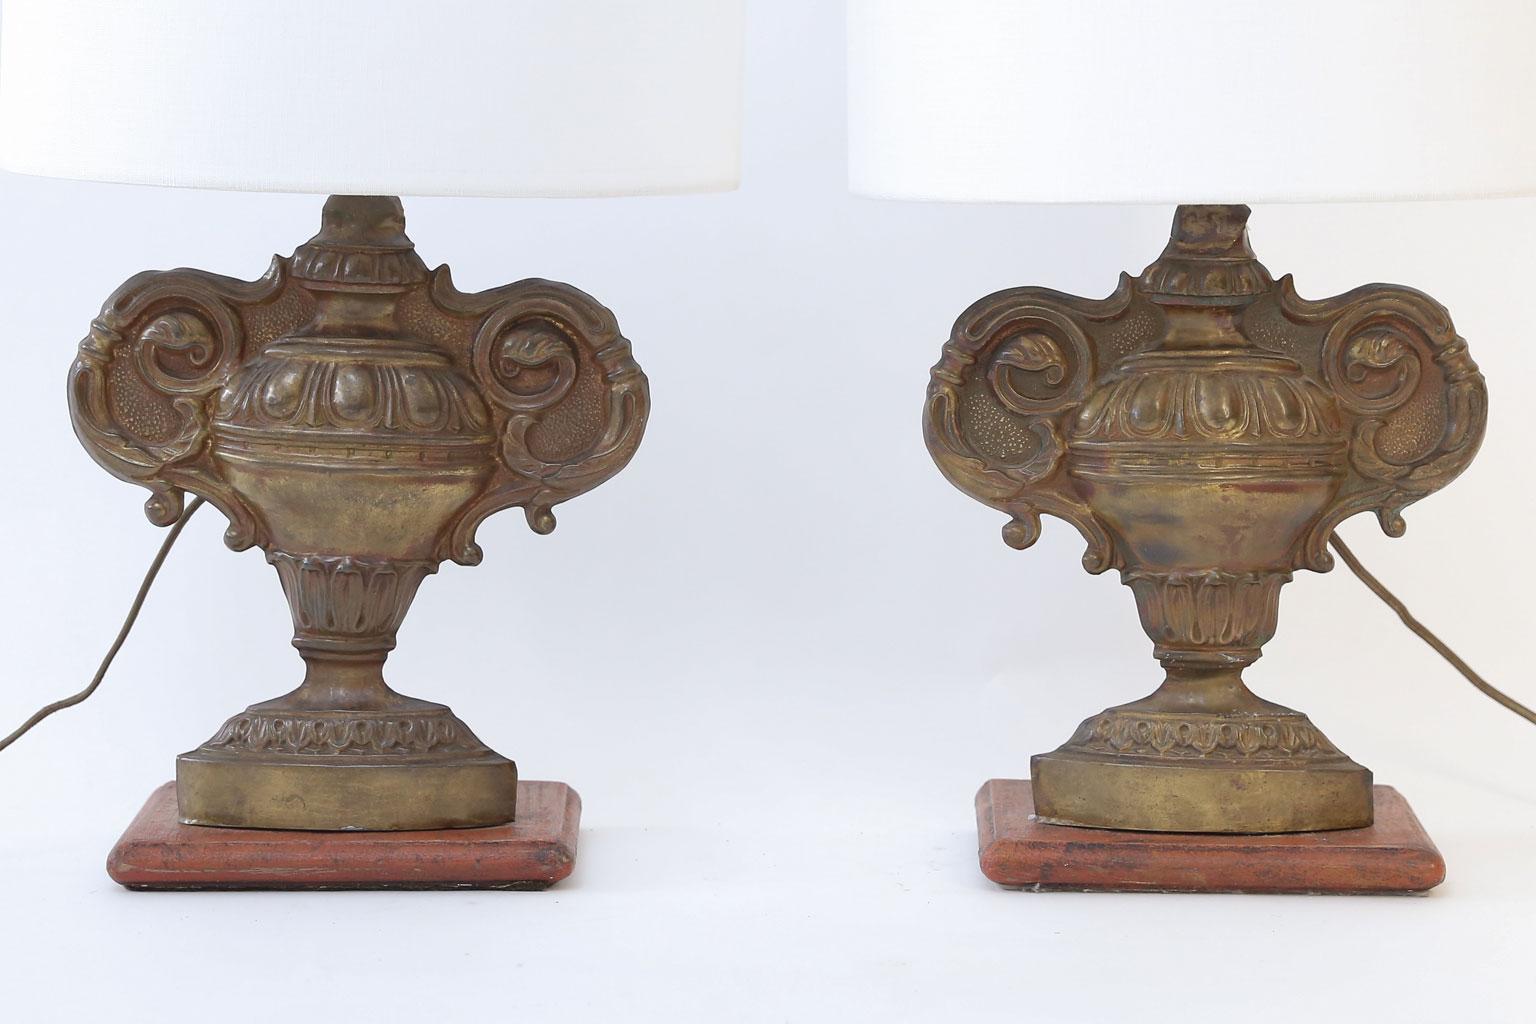 Pair of repousse tole lamps from 19th century gilt-tole fragments mounted on painted stands. Newly wired for use within the USA. Includes complementary linen shades (listed measurements include shades).